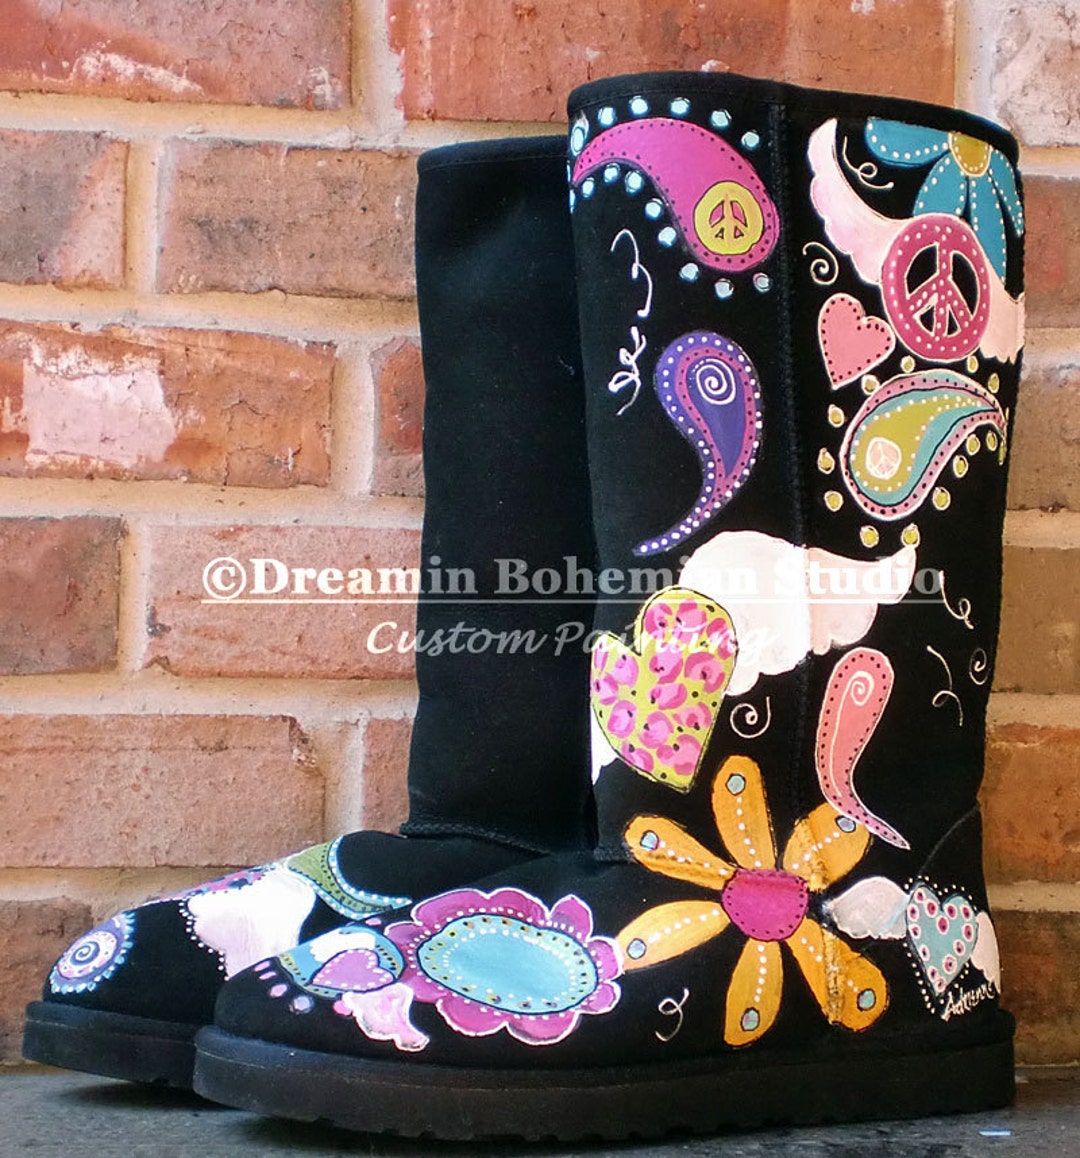 Girls CUSTOM PAINTED *UGG* BOOTS Chestnut Brown 12